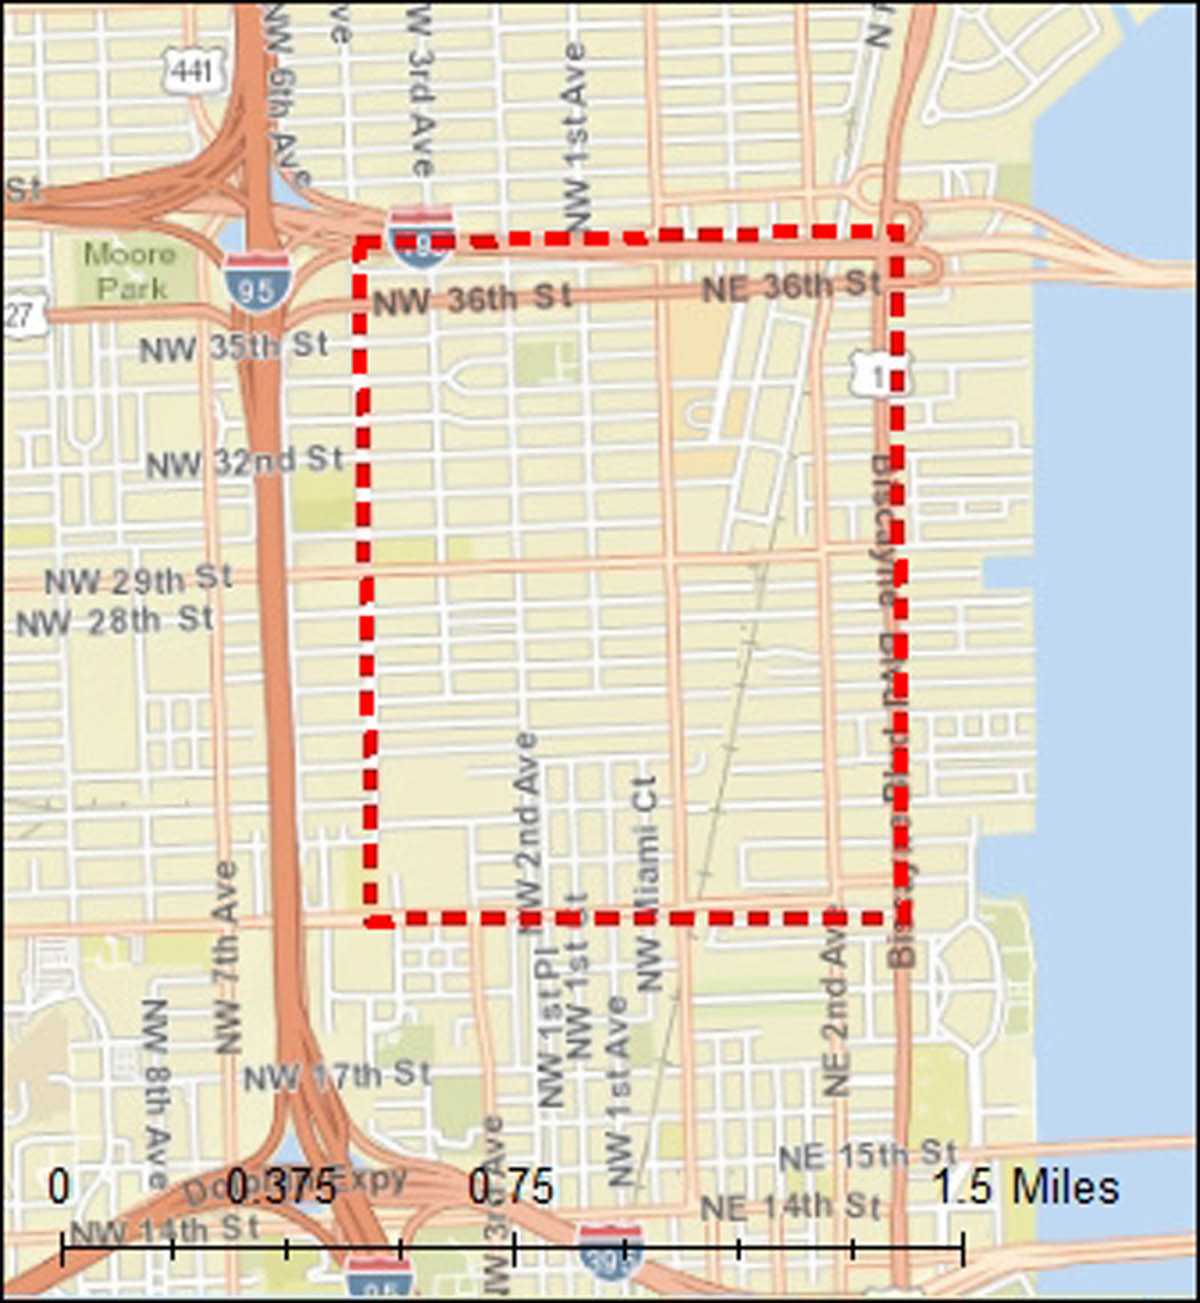 Map of the Wynwood area of Miami where there was active Zika transmission